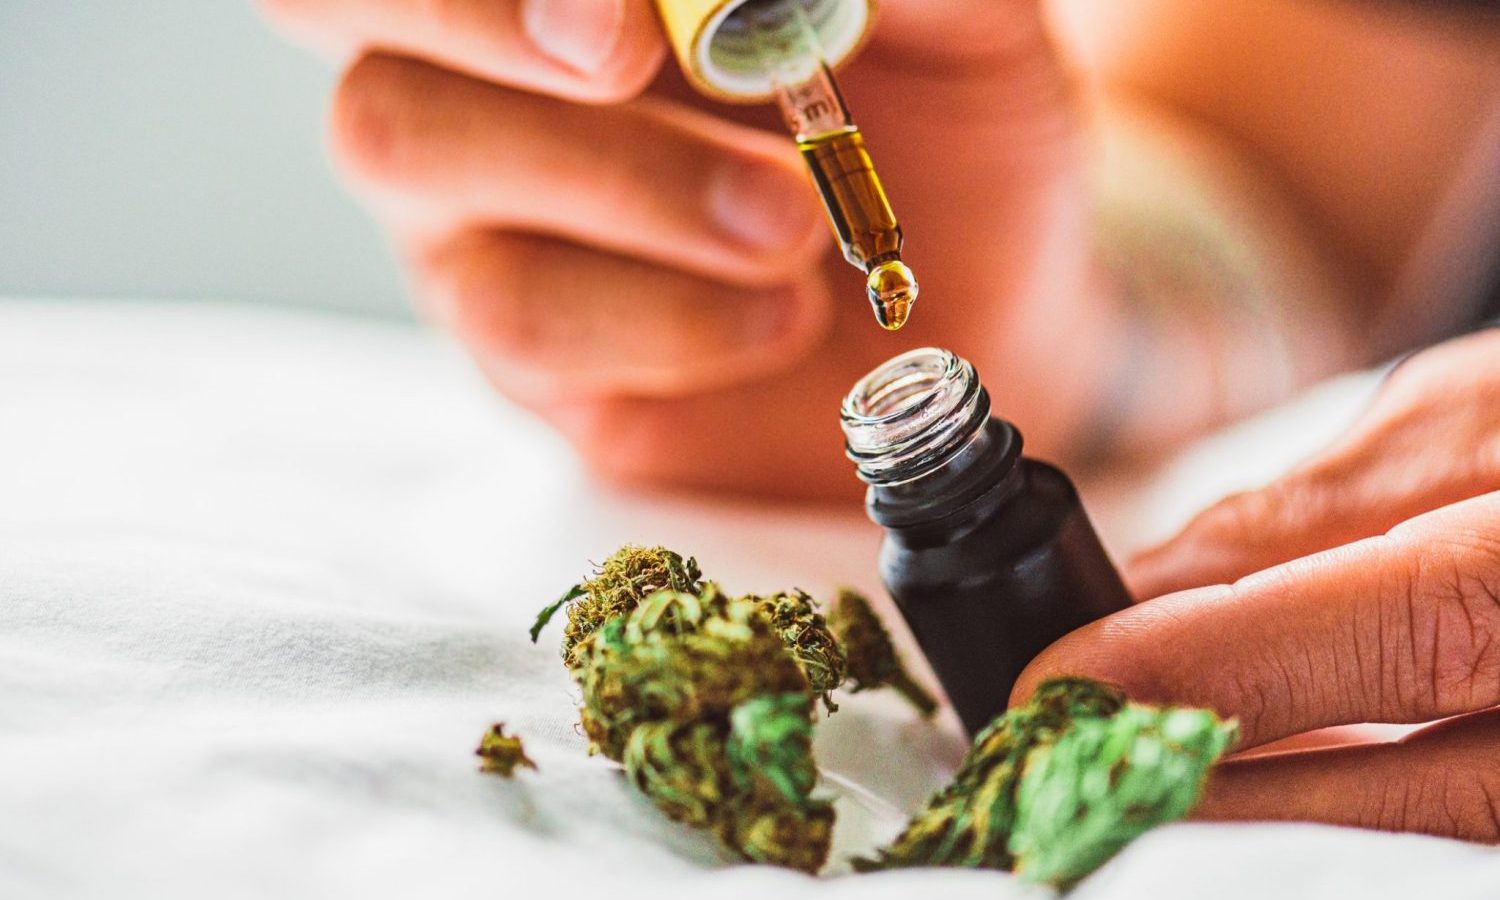 FDA Head Says They Can’t Regulate CBD Until They Get This